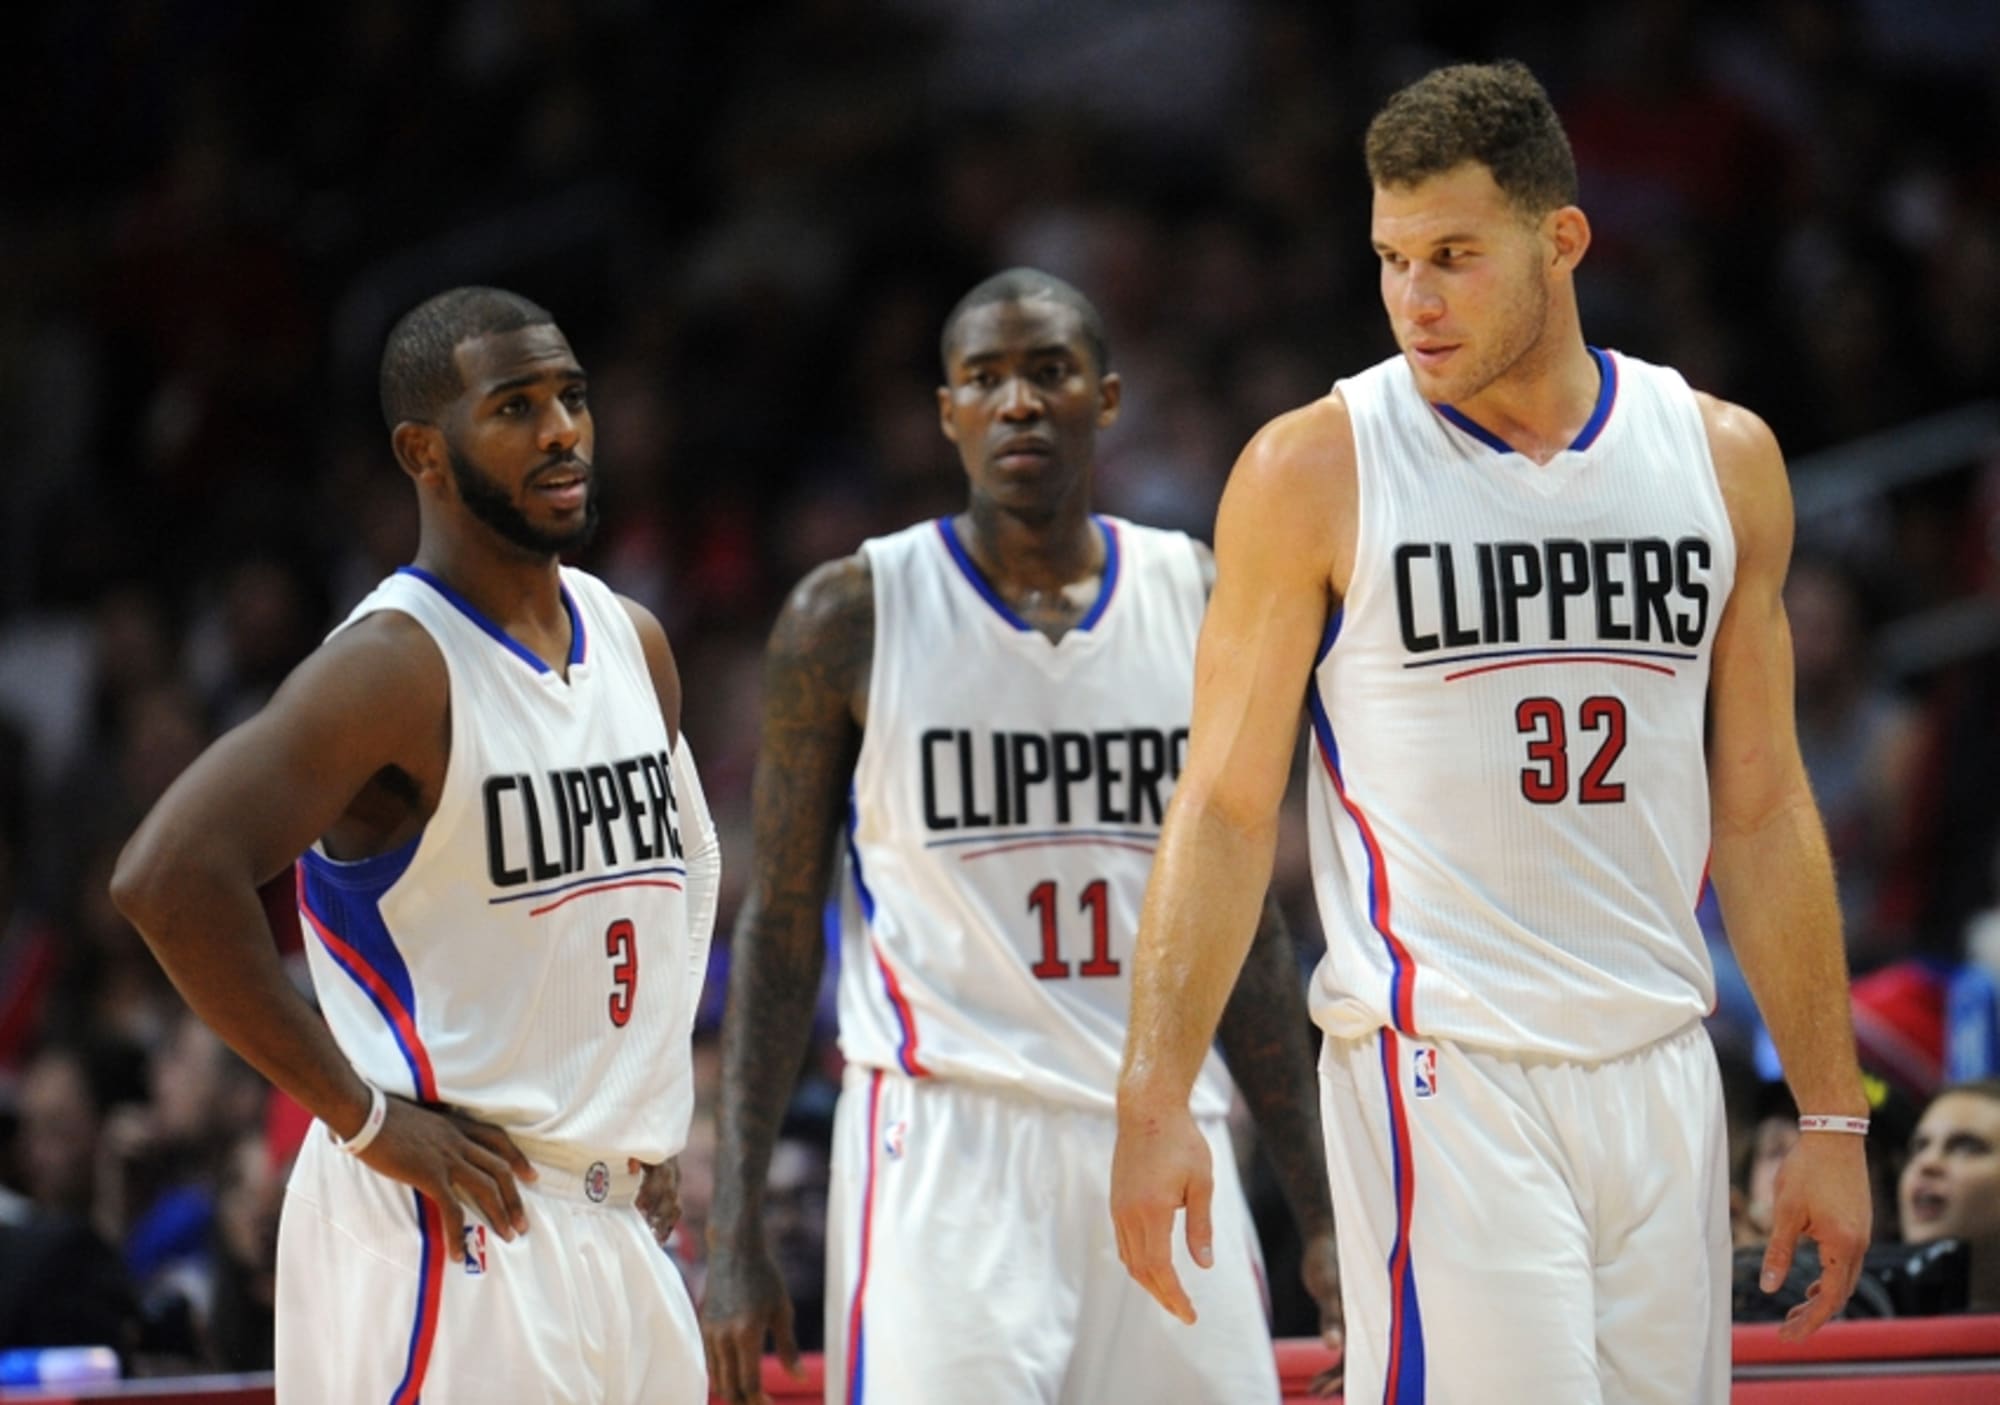 clippers roster jersey numbers